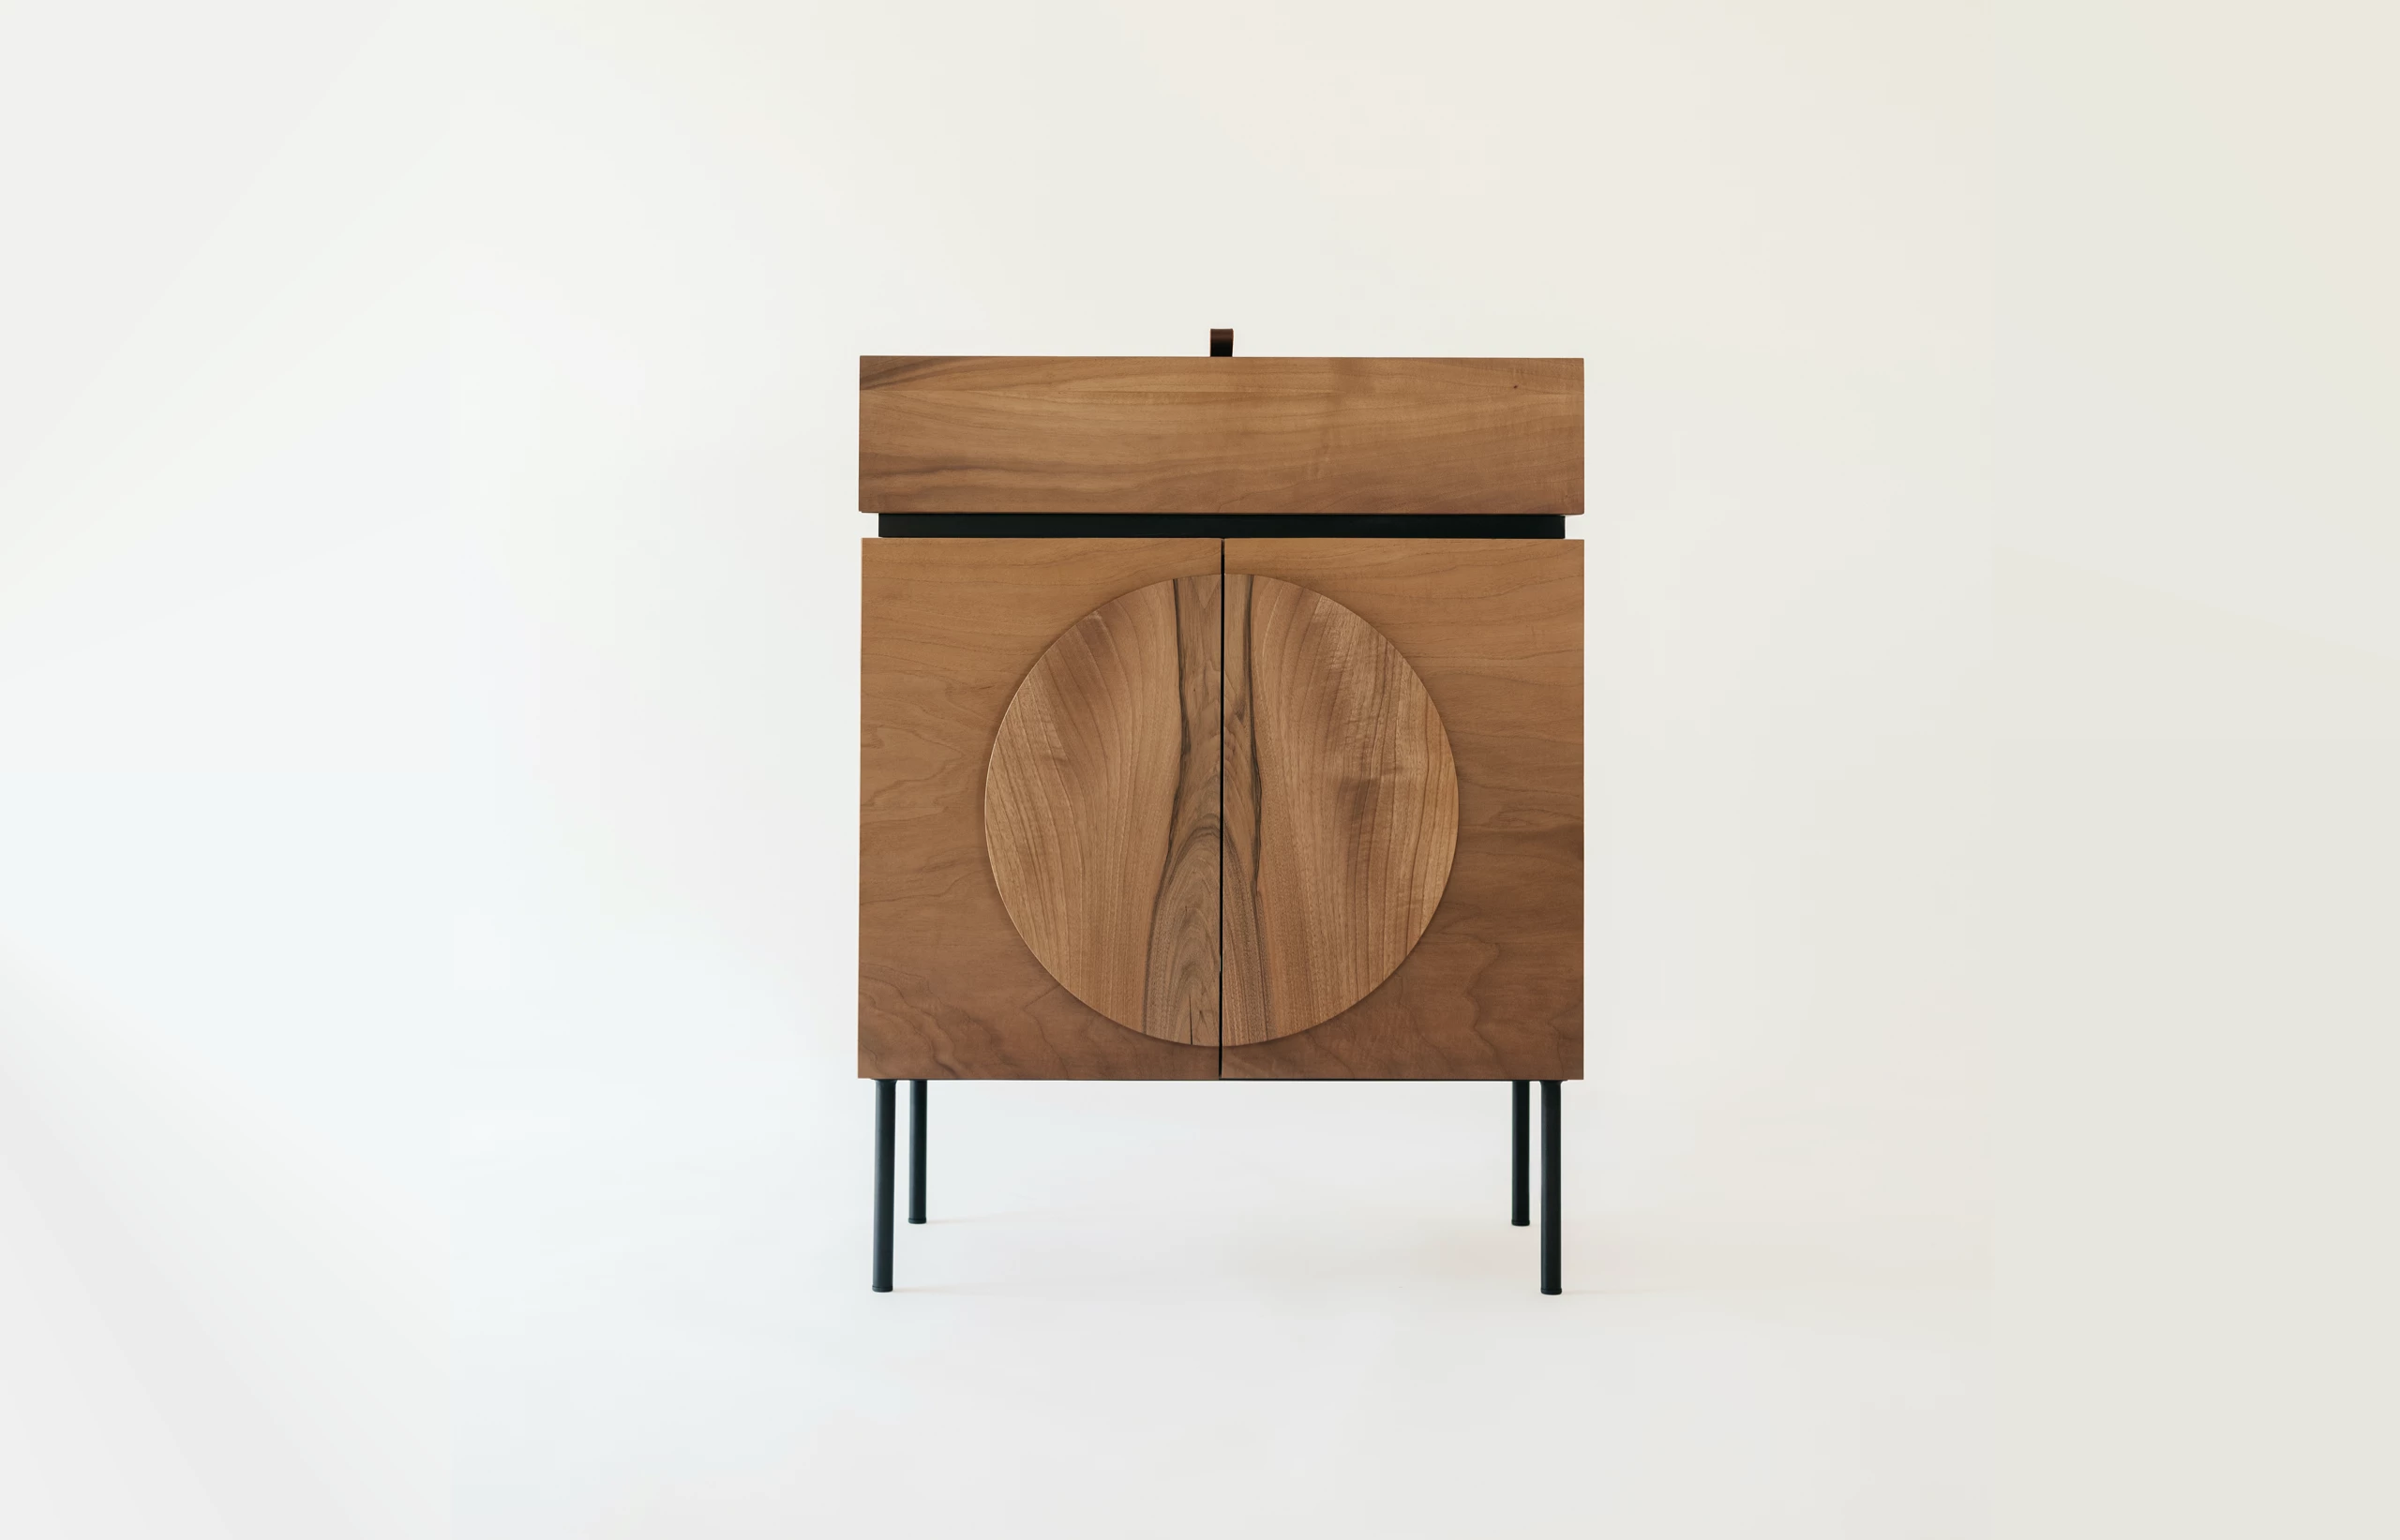 Products - Rinocca (gianni walnut solid wood cabinet)